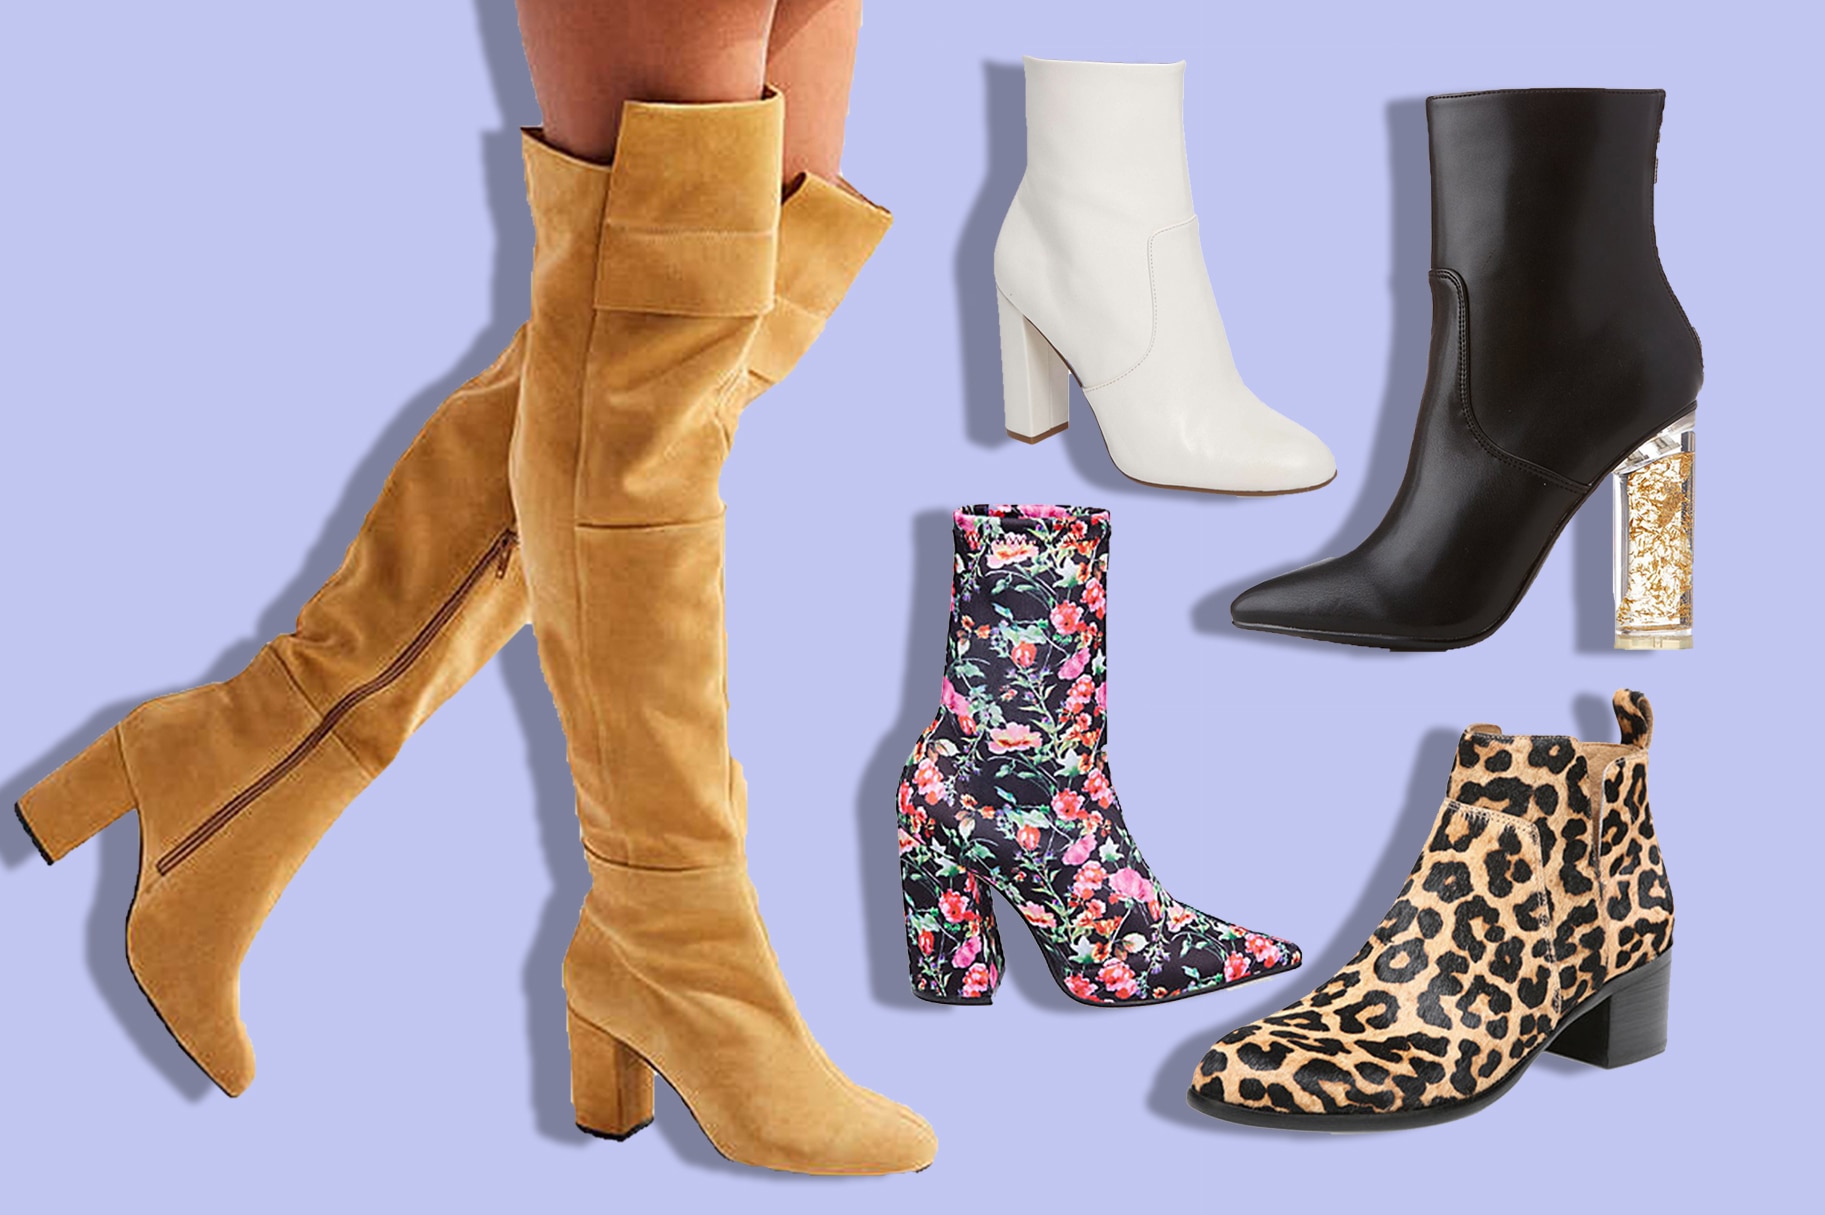 30 Boots to Try This Fall | Style & Living